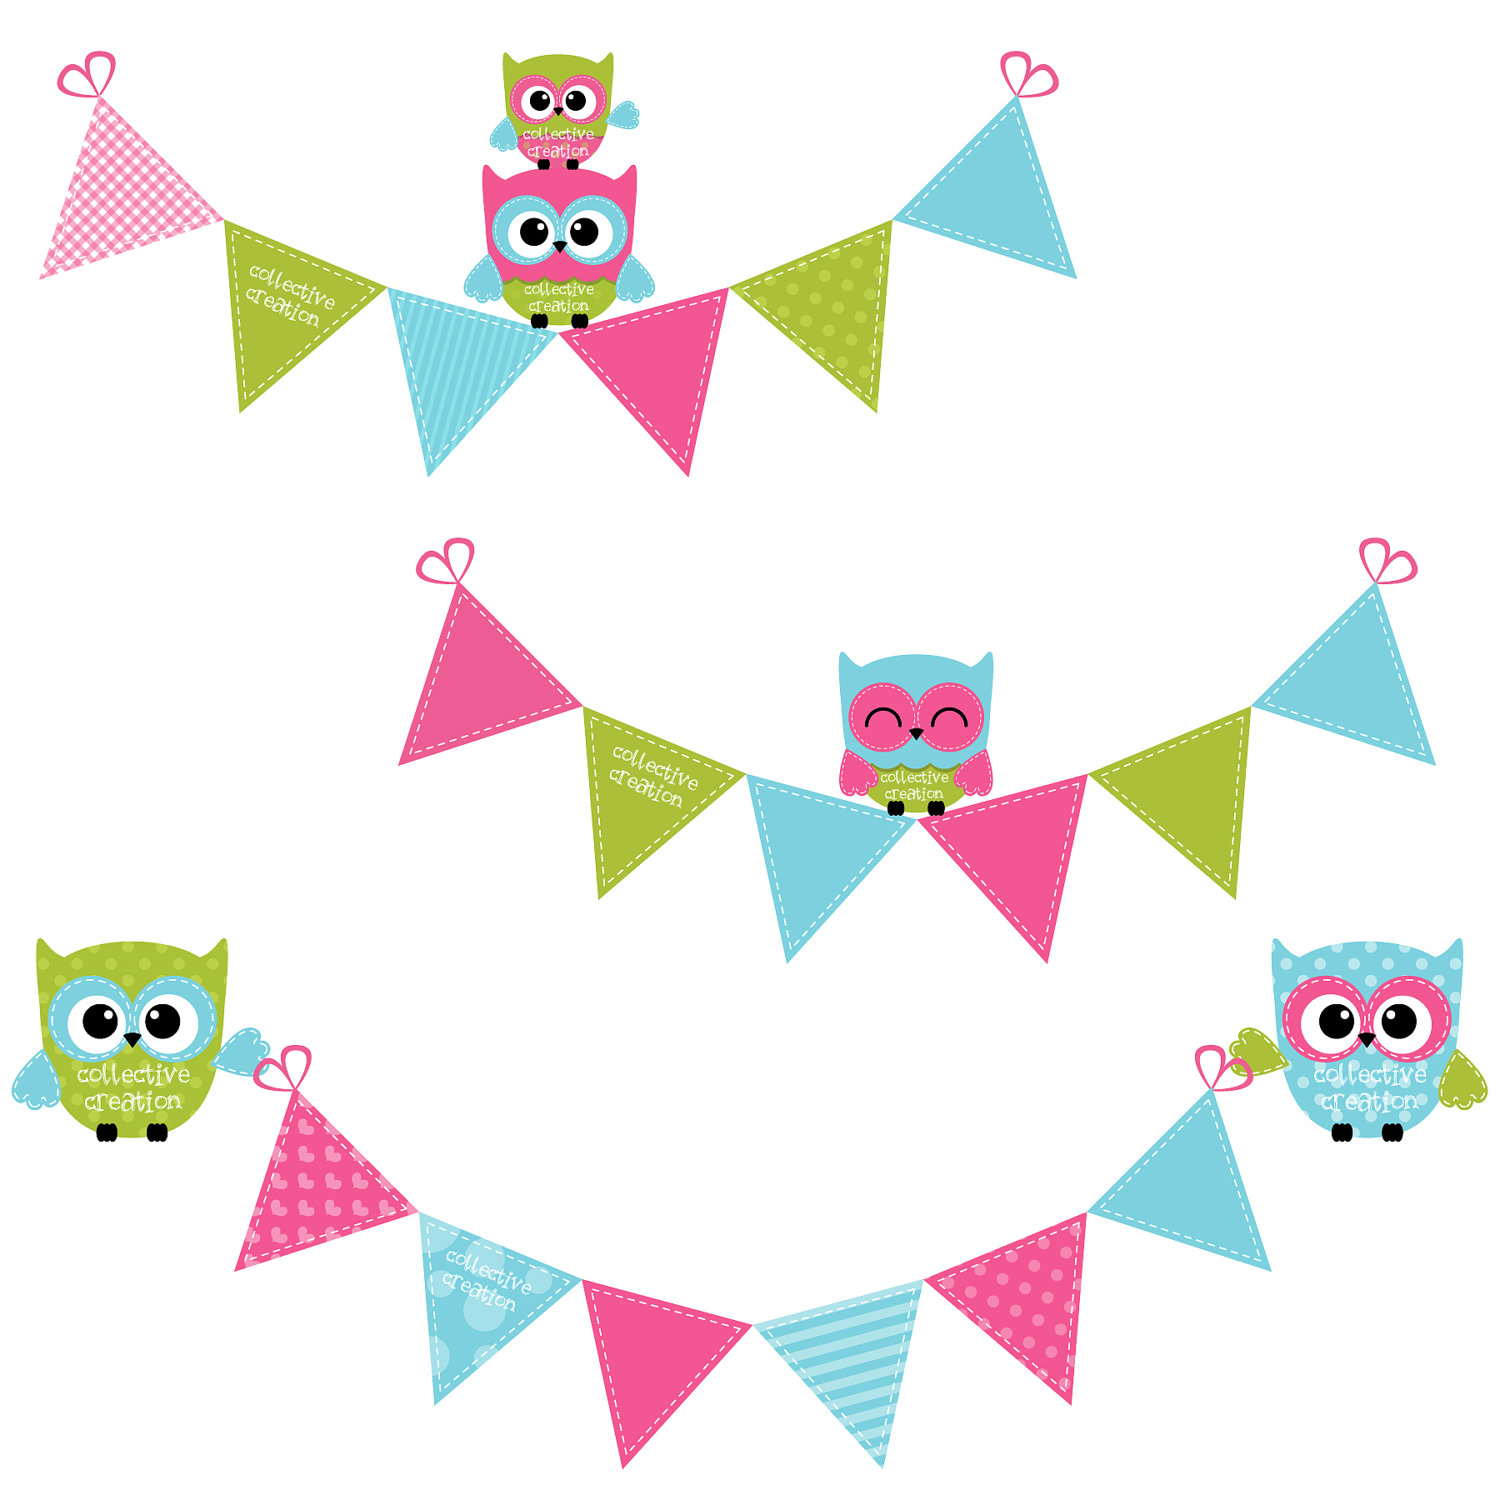 bunting clip art free download - photo #22